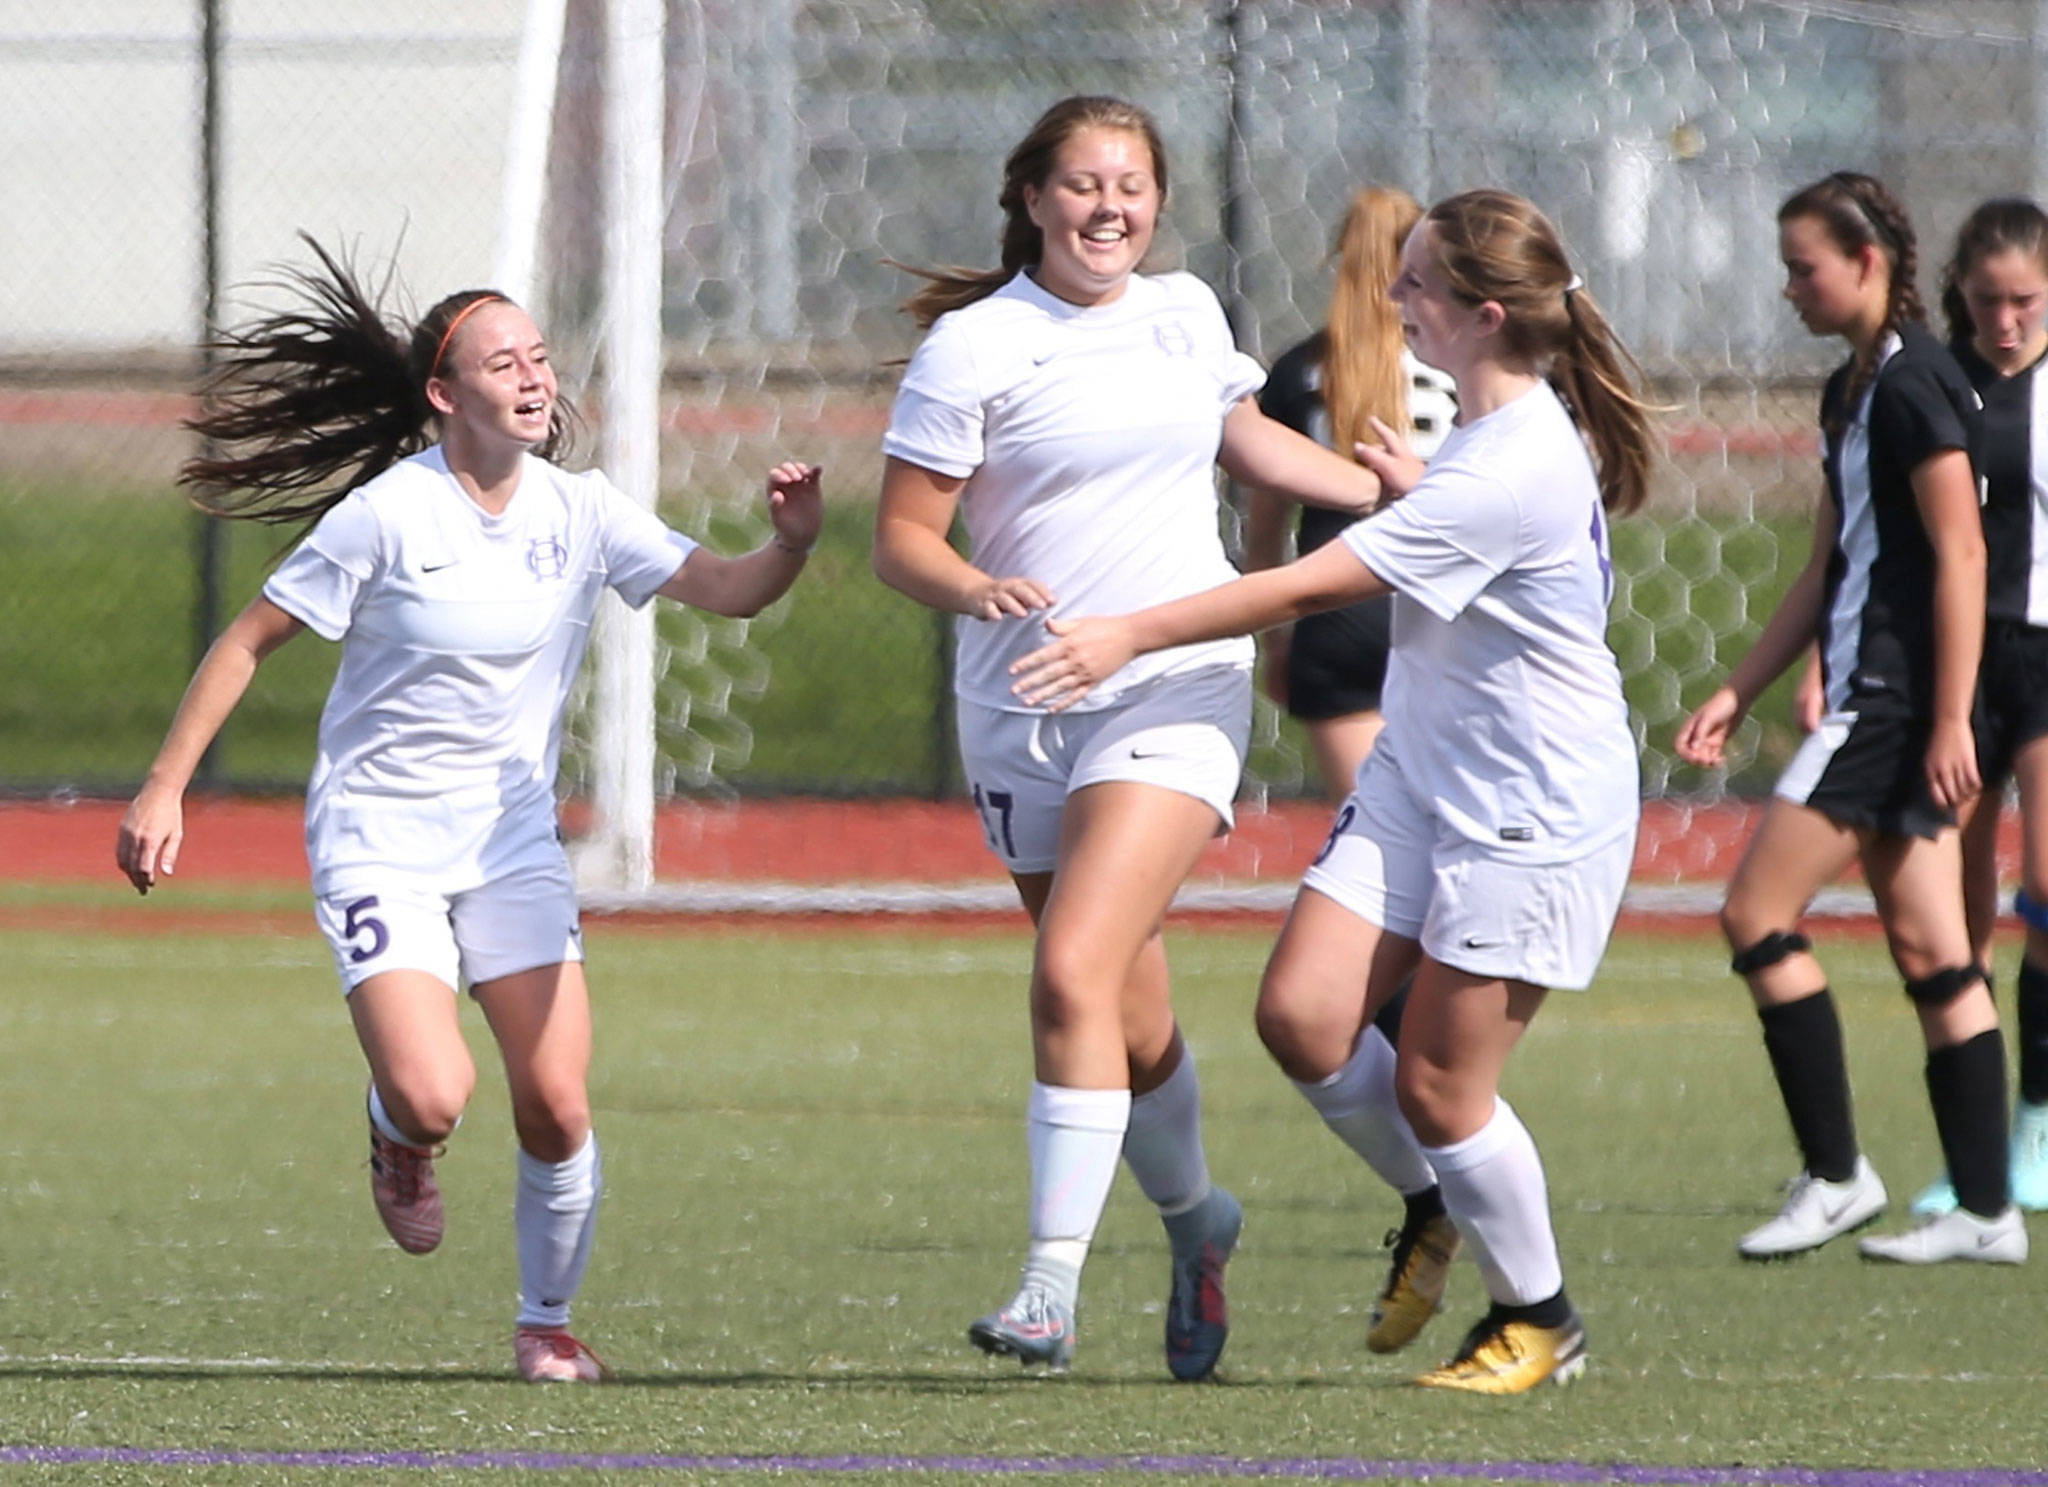 Natalie Plush, center, celebrates her goal with Aiden Anderson (5) and Peyton Rhyne. (Photo by John Fisken)